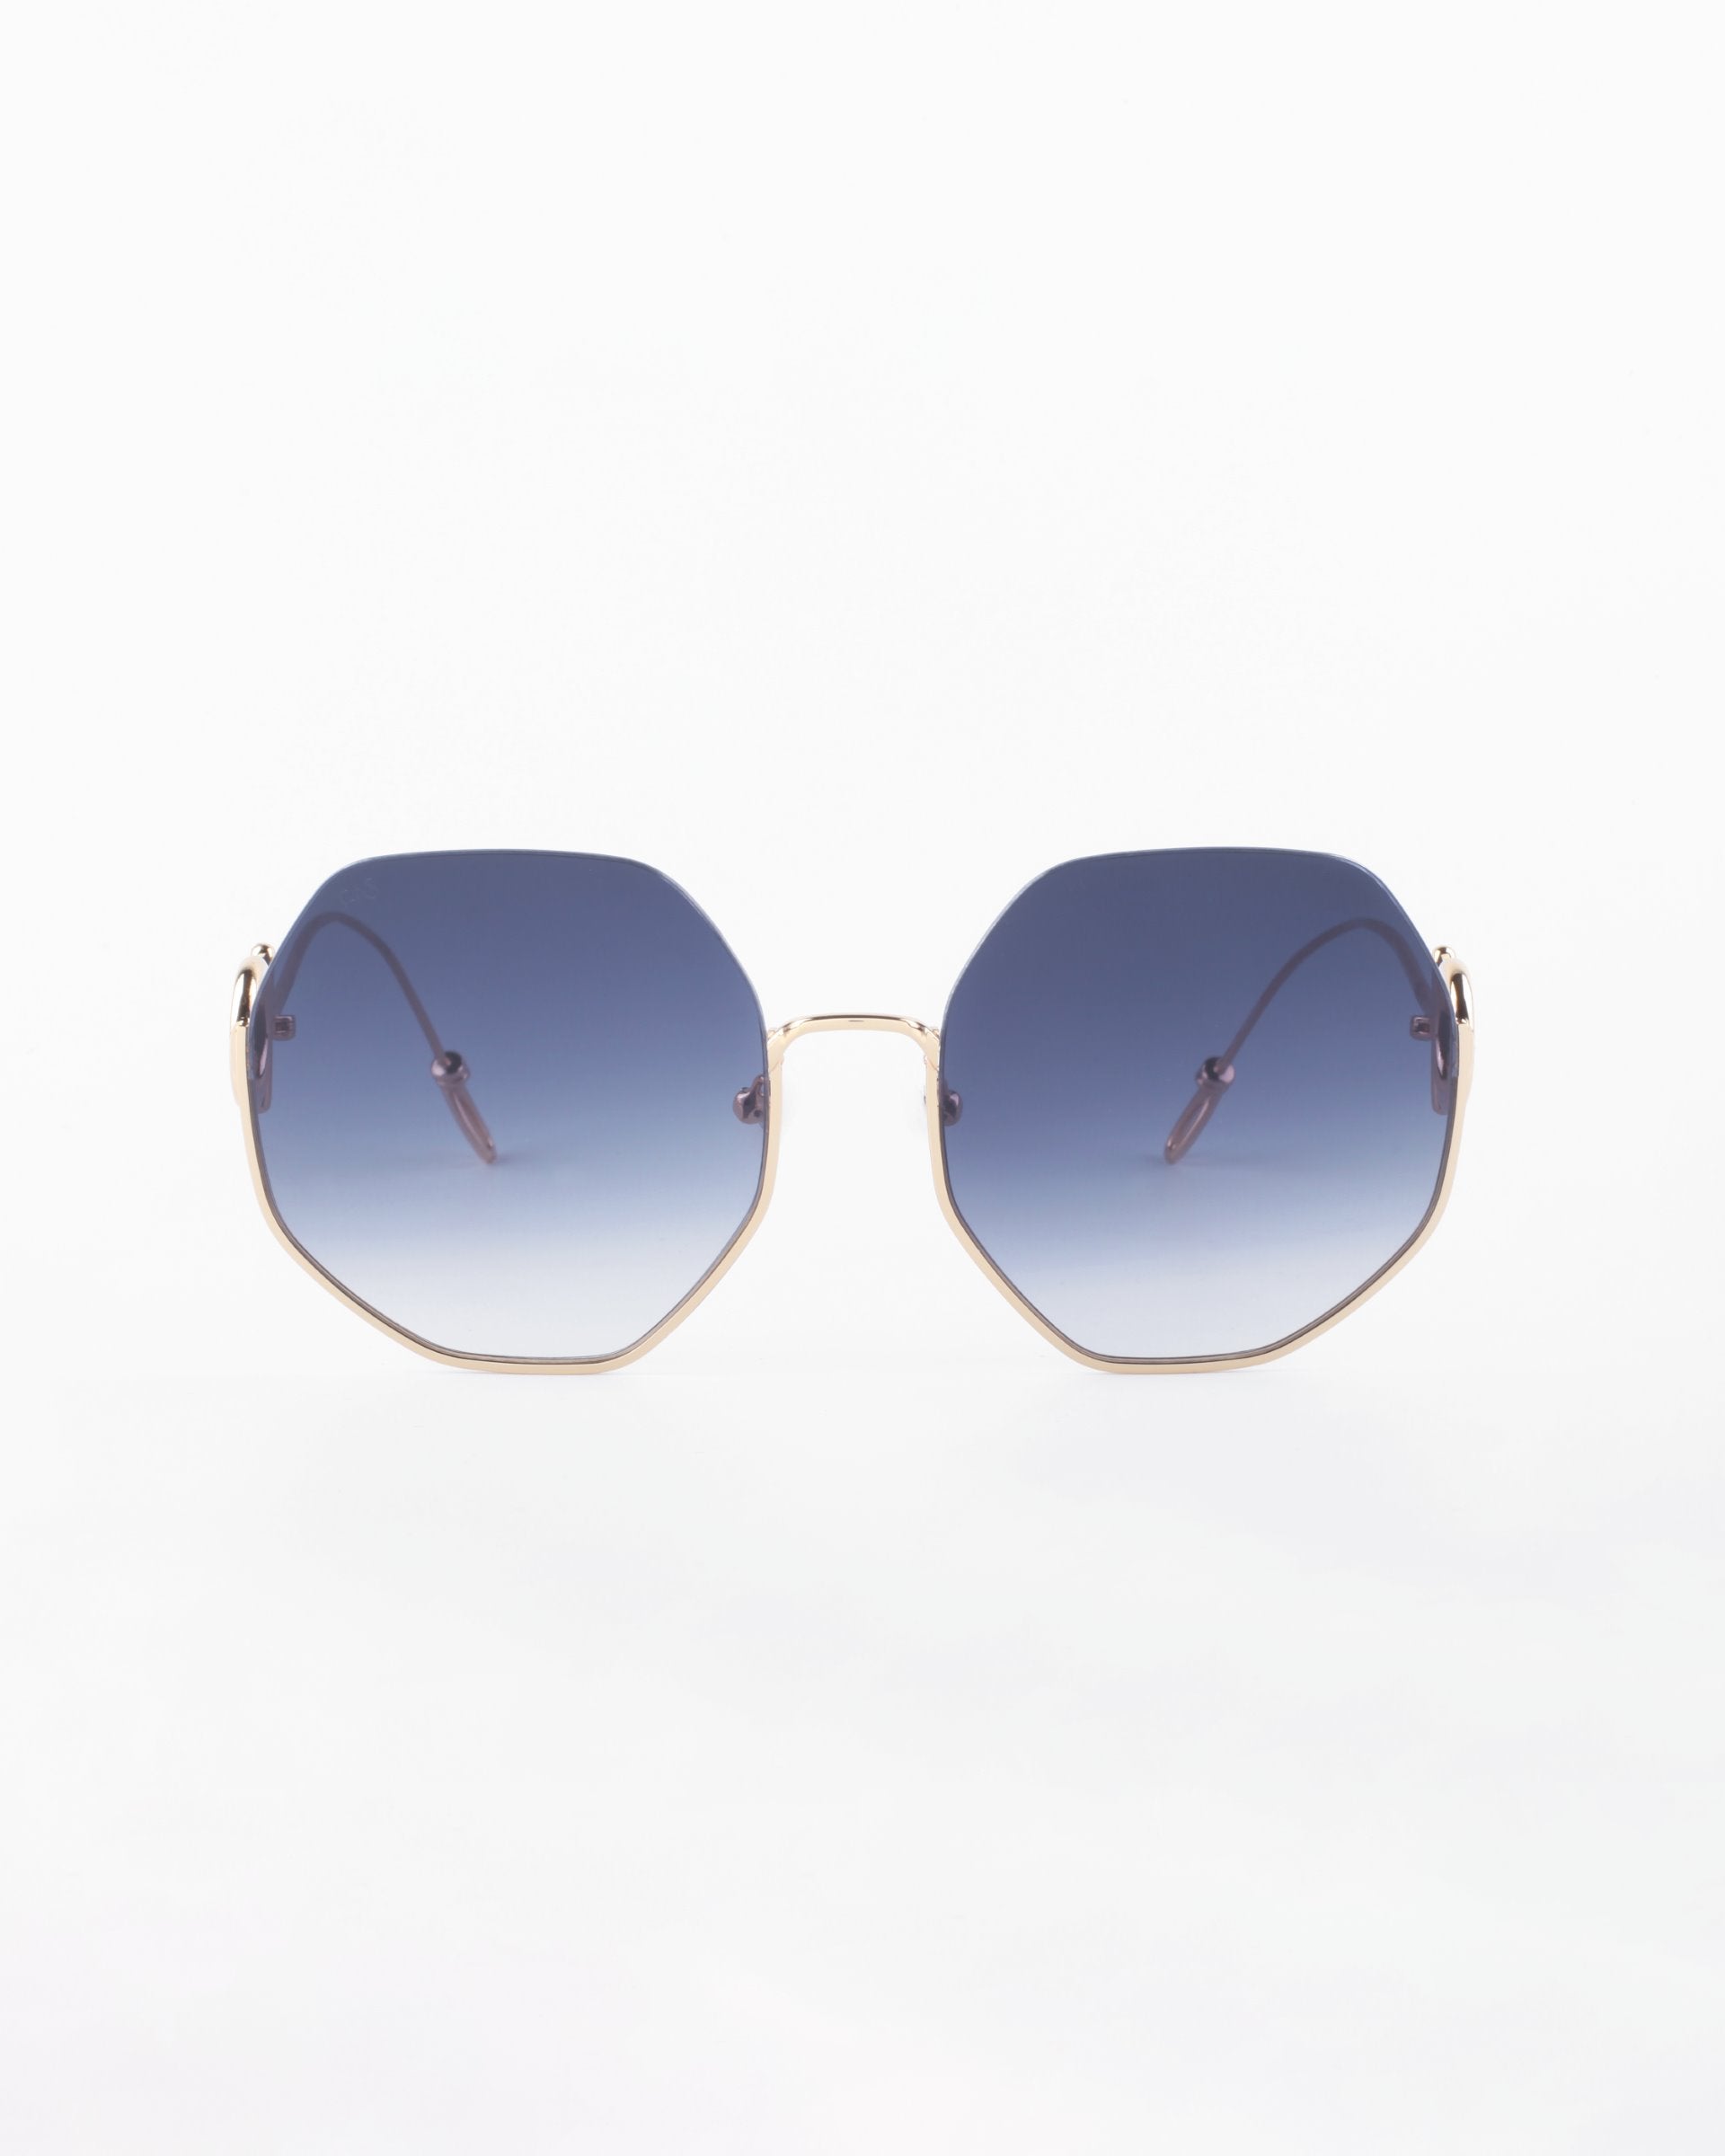 A pair of stylish, limited edition For Art's Sake® Palace sunglasses with blue gradient hexagonal lenses and thin, 18-karat gold-plated frames is displayed against a plain white background. The design is modern and chic, offering both a fashionable look and UVA & UVB protection.